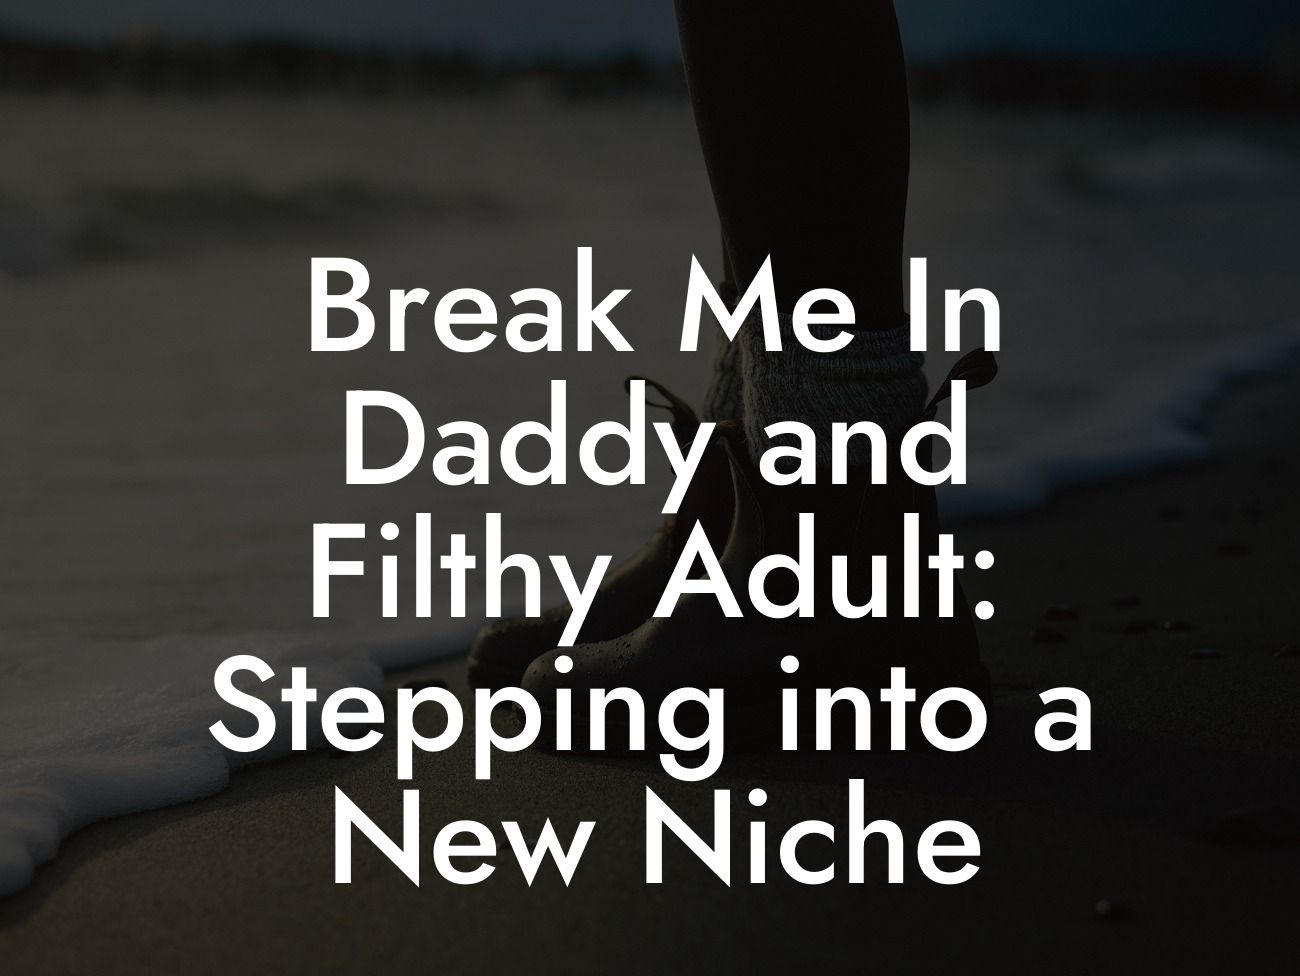 Break Me In Daddy and Filthy Adult: Stepping into a New Niche